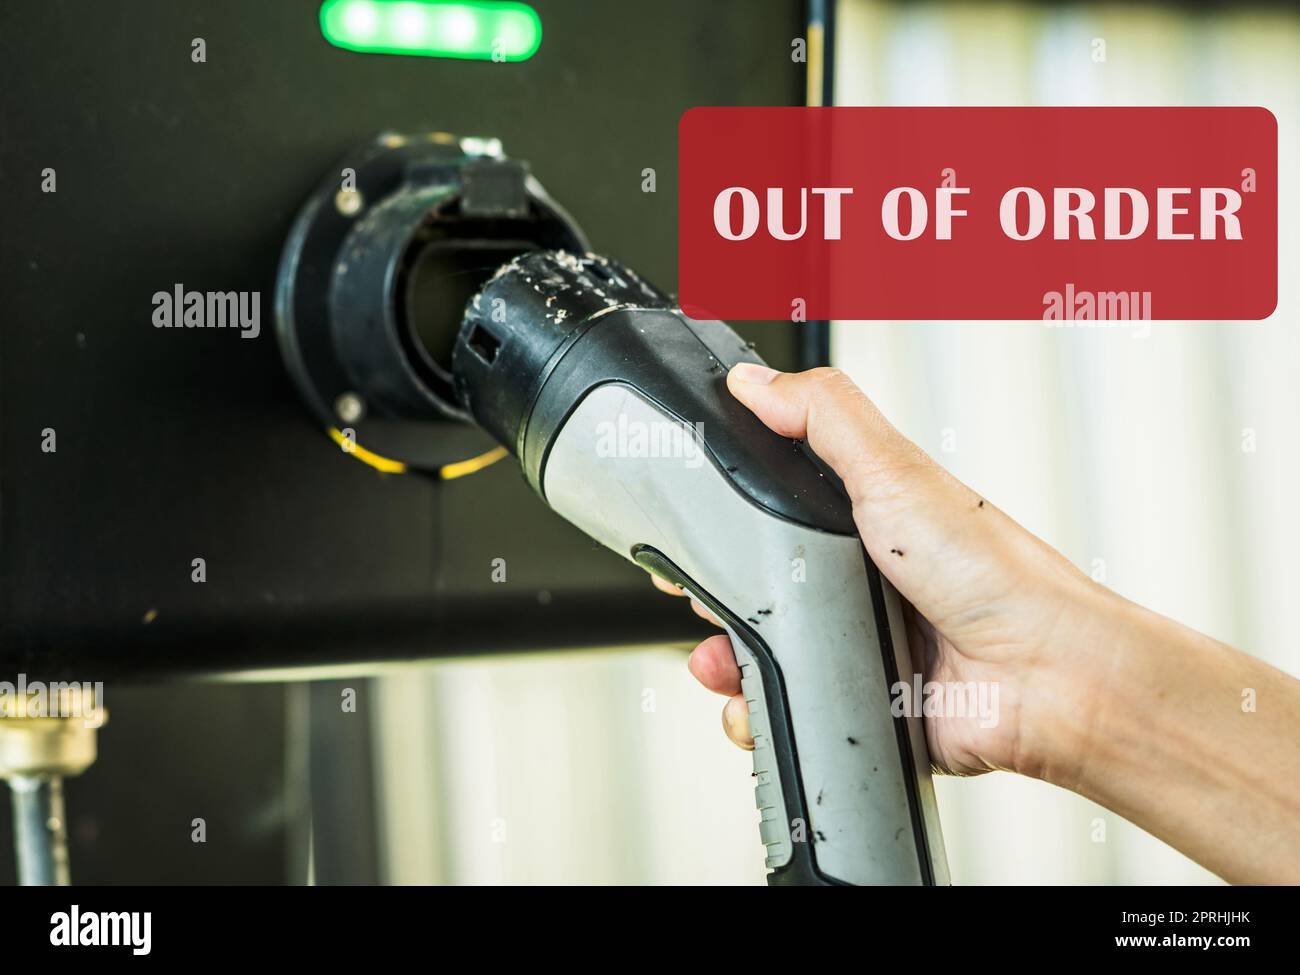 Out of order electric vehicle charging station. Electric vehicle charging station infrastructure problems. Hand holding EV charger that hasn't been used for a long time until the ants come to nest. Stock Photo